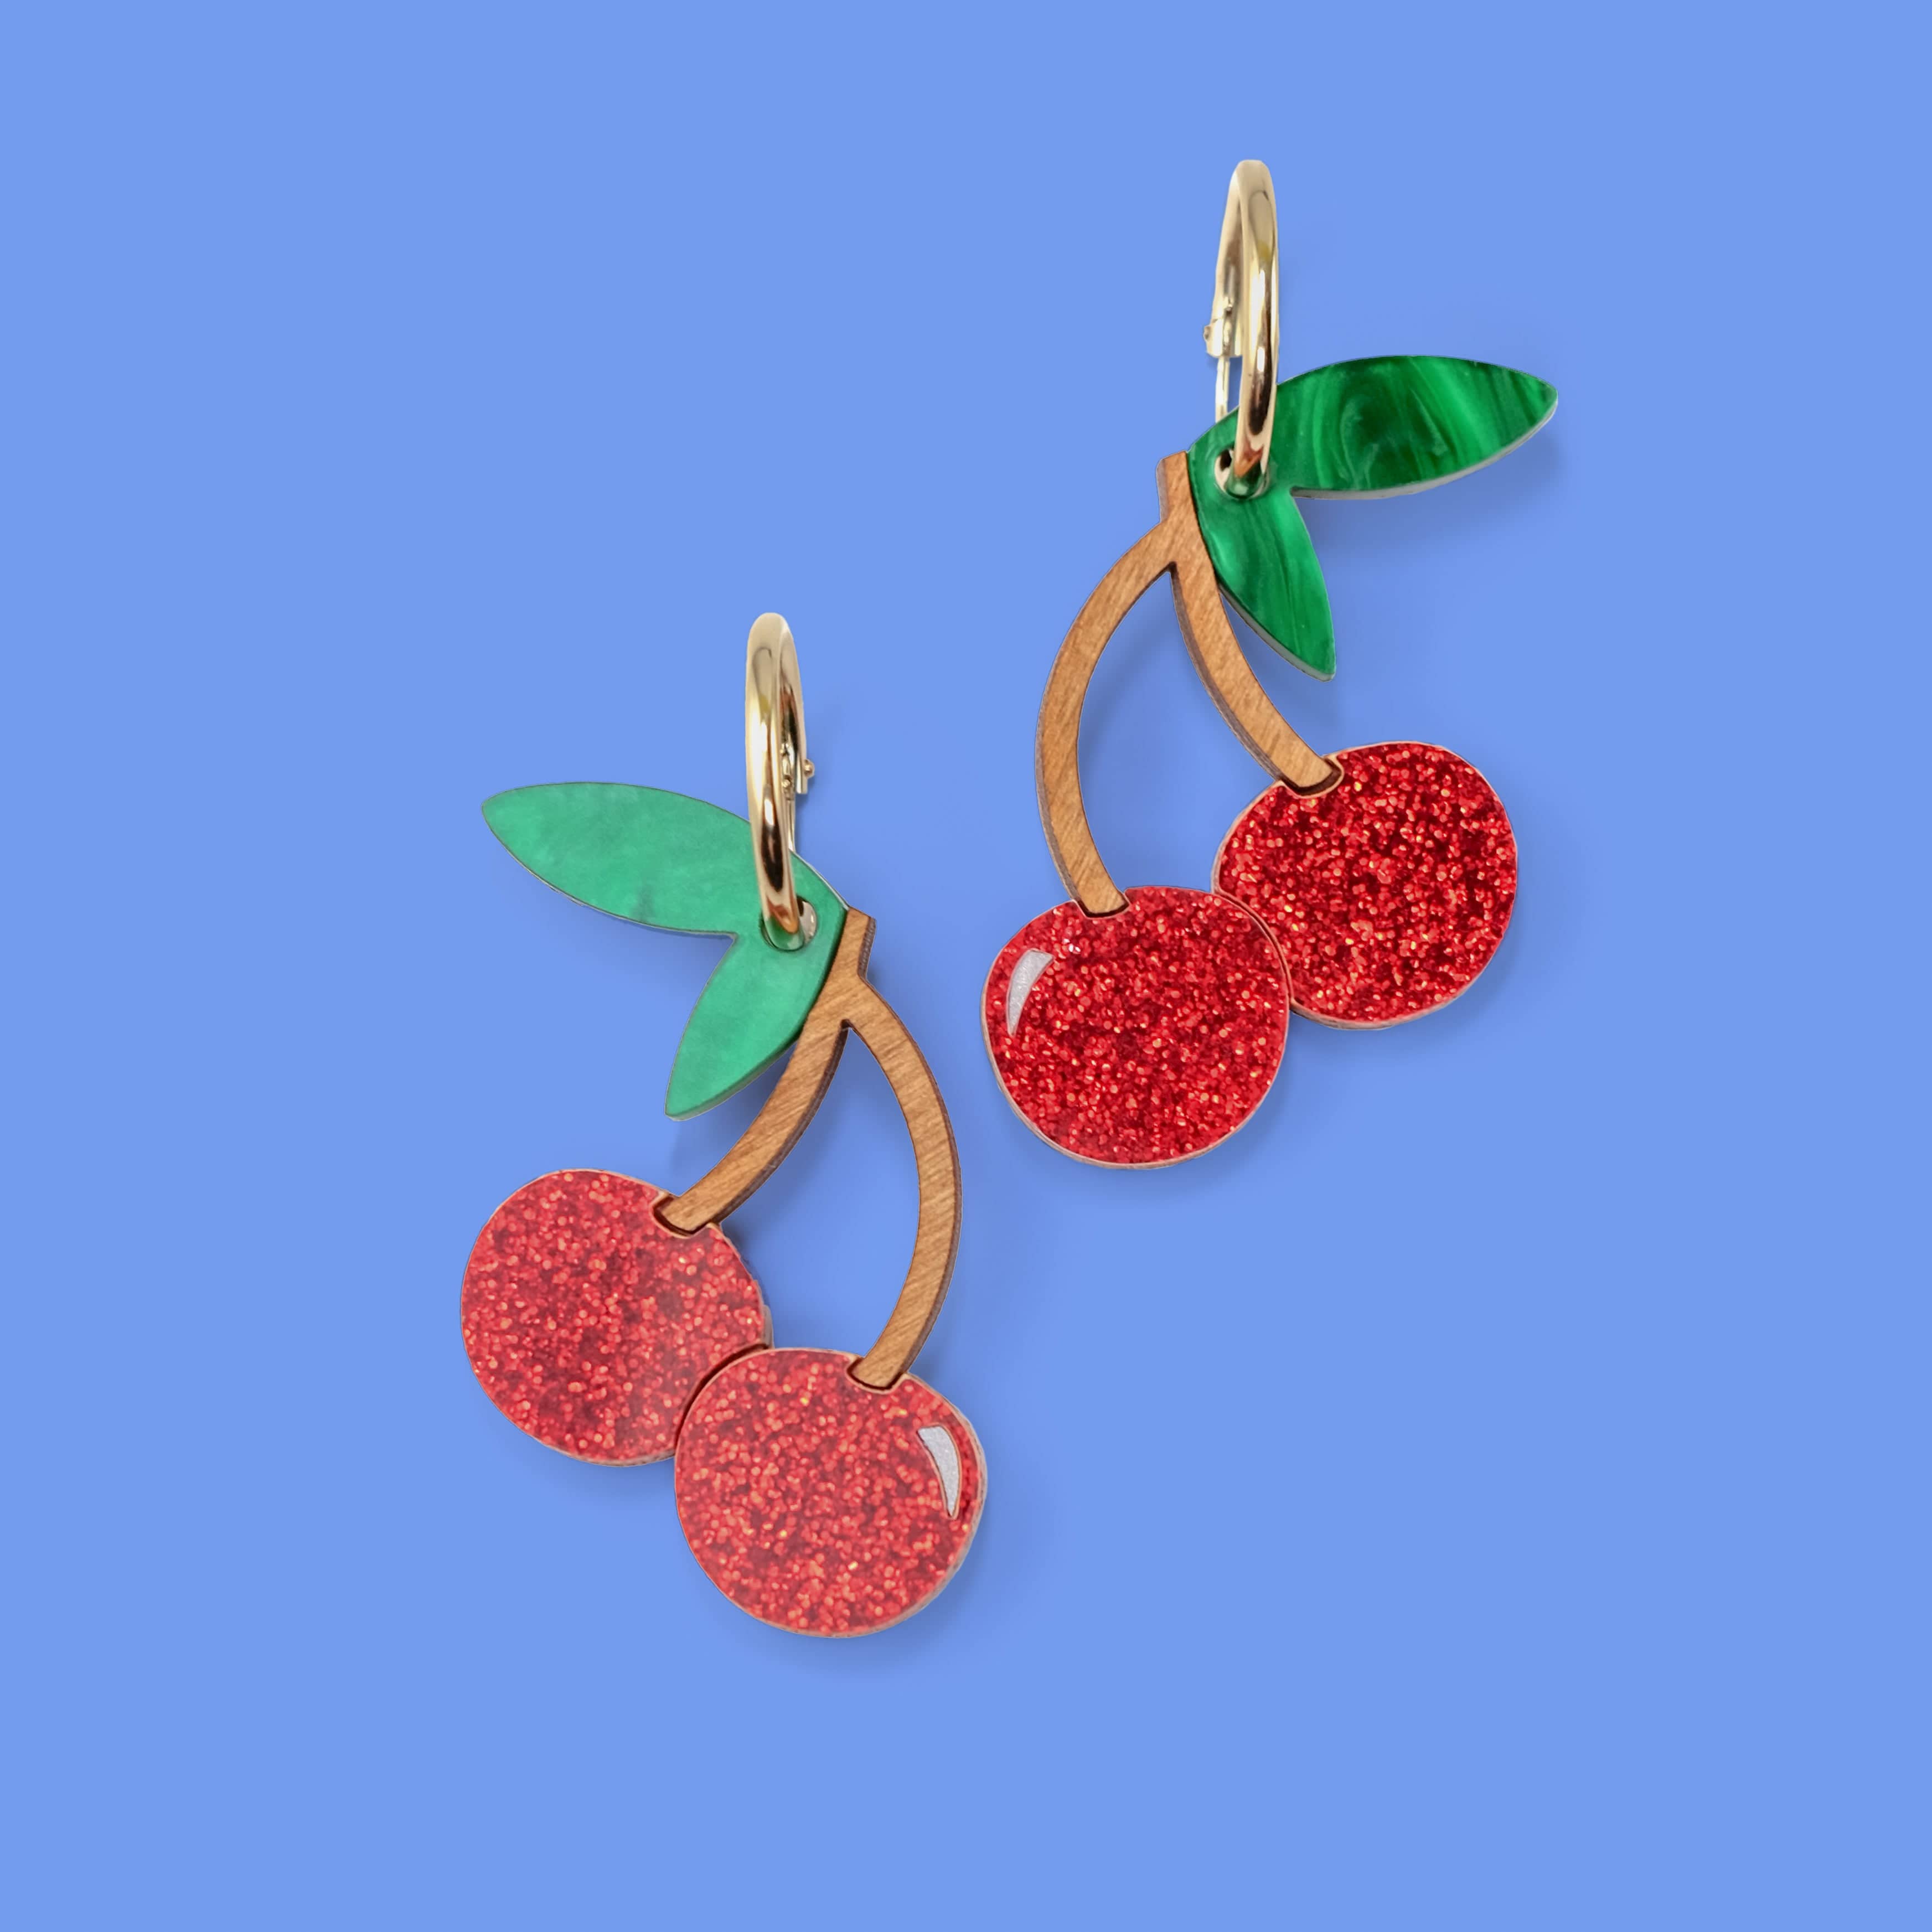 Fun and elegant Cherry dangly earrings with gold-filled hoops